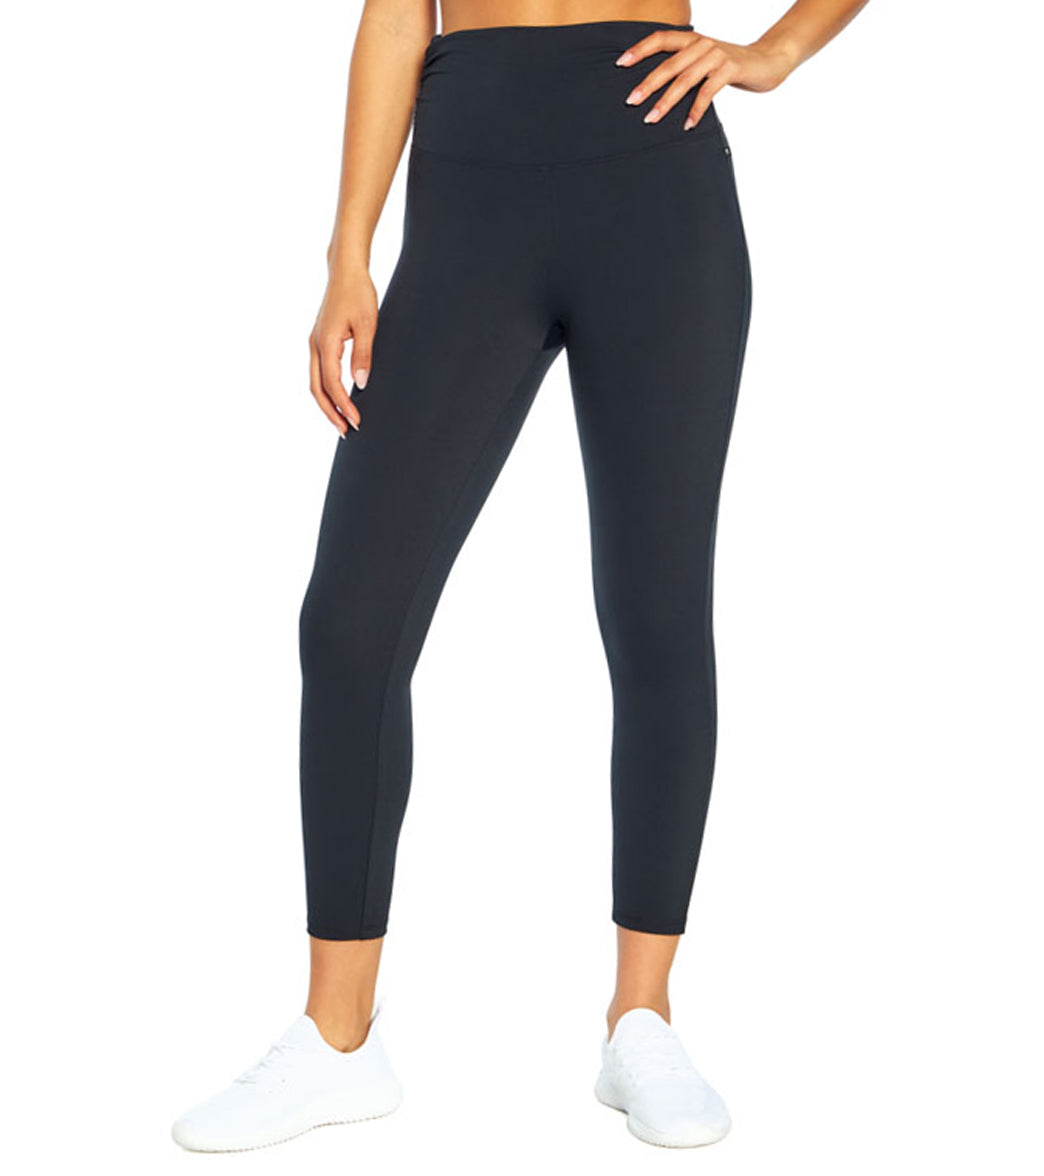 Cotton Spandex Xl Pepper Mint Girls Legging - Get Best Price from  Manufacturers & Suppliers in India